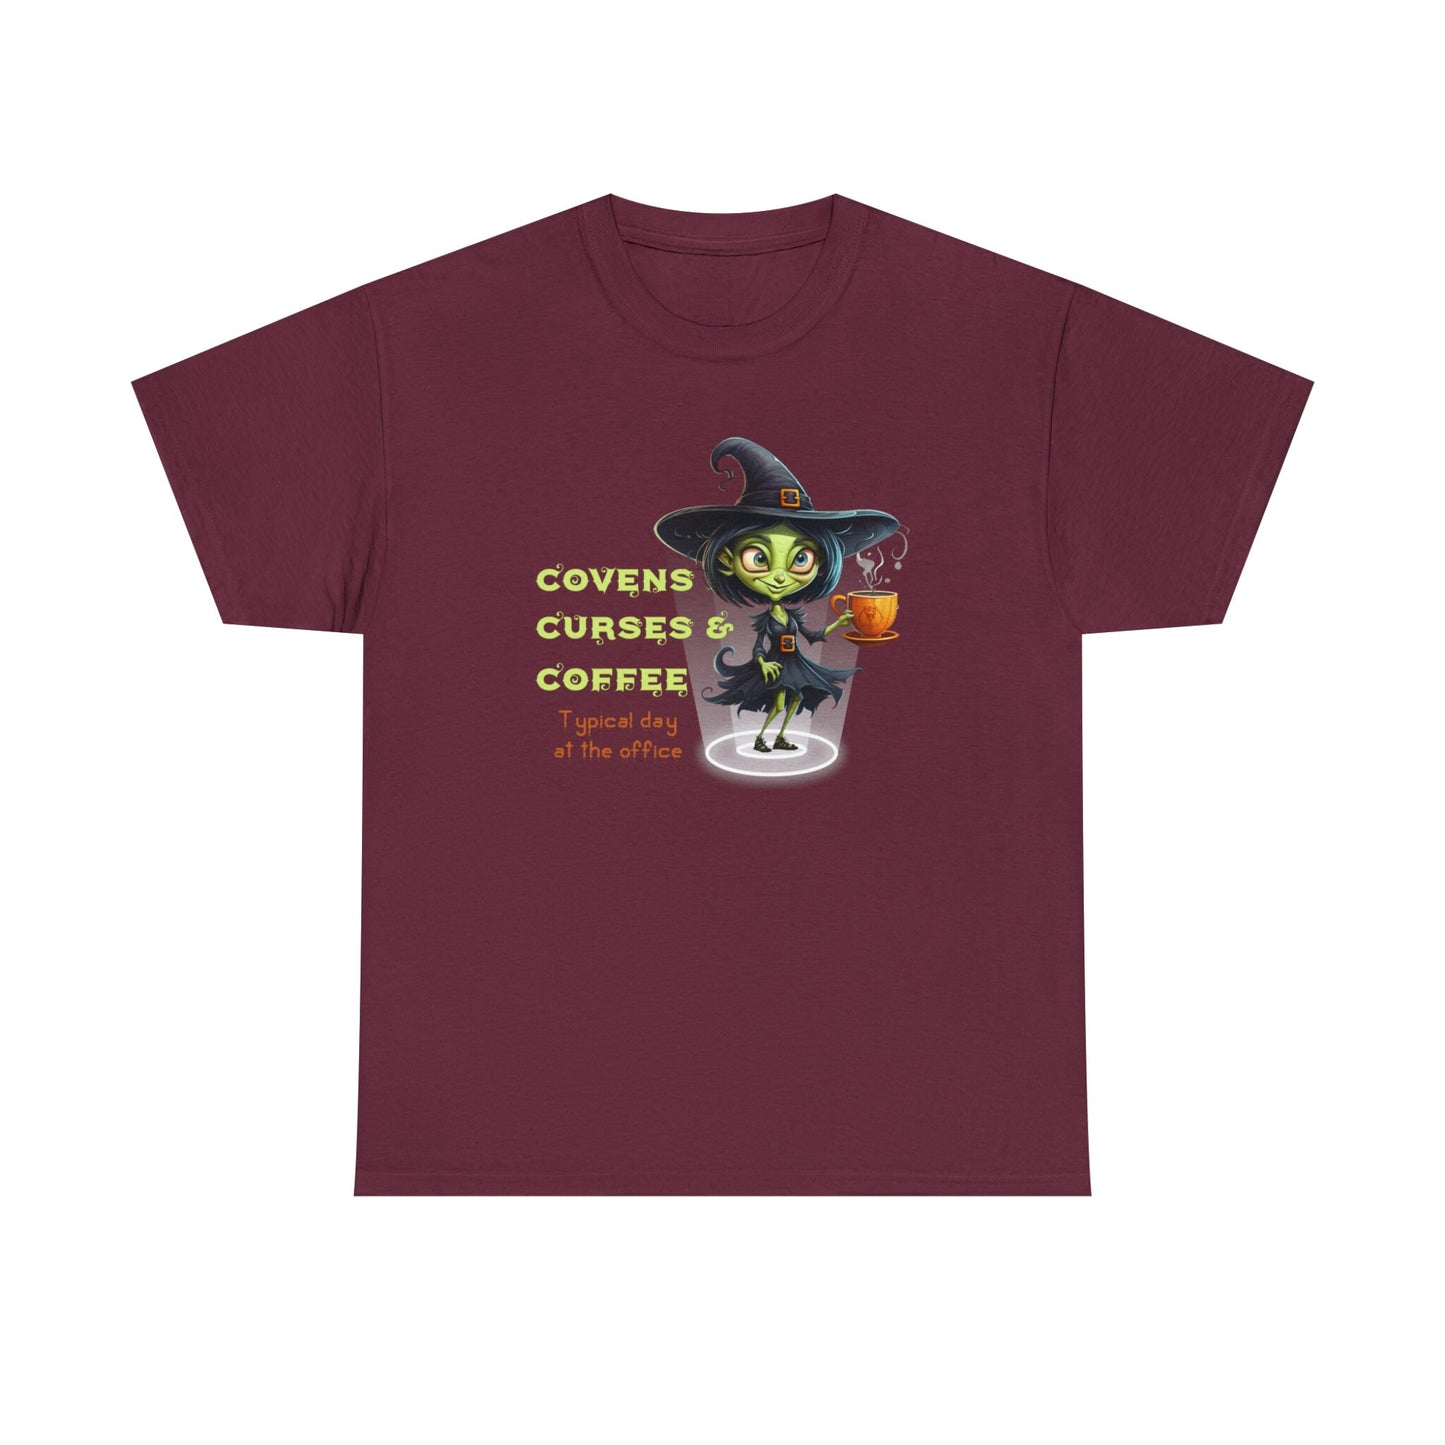 Coffee, Covens & Curses a Typical Day at the Office, Halloween T-shirt Spooky Halloween Tee featuring a Green Witch